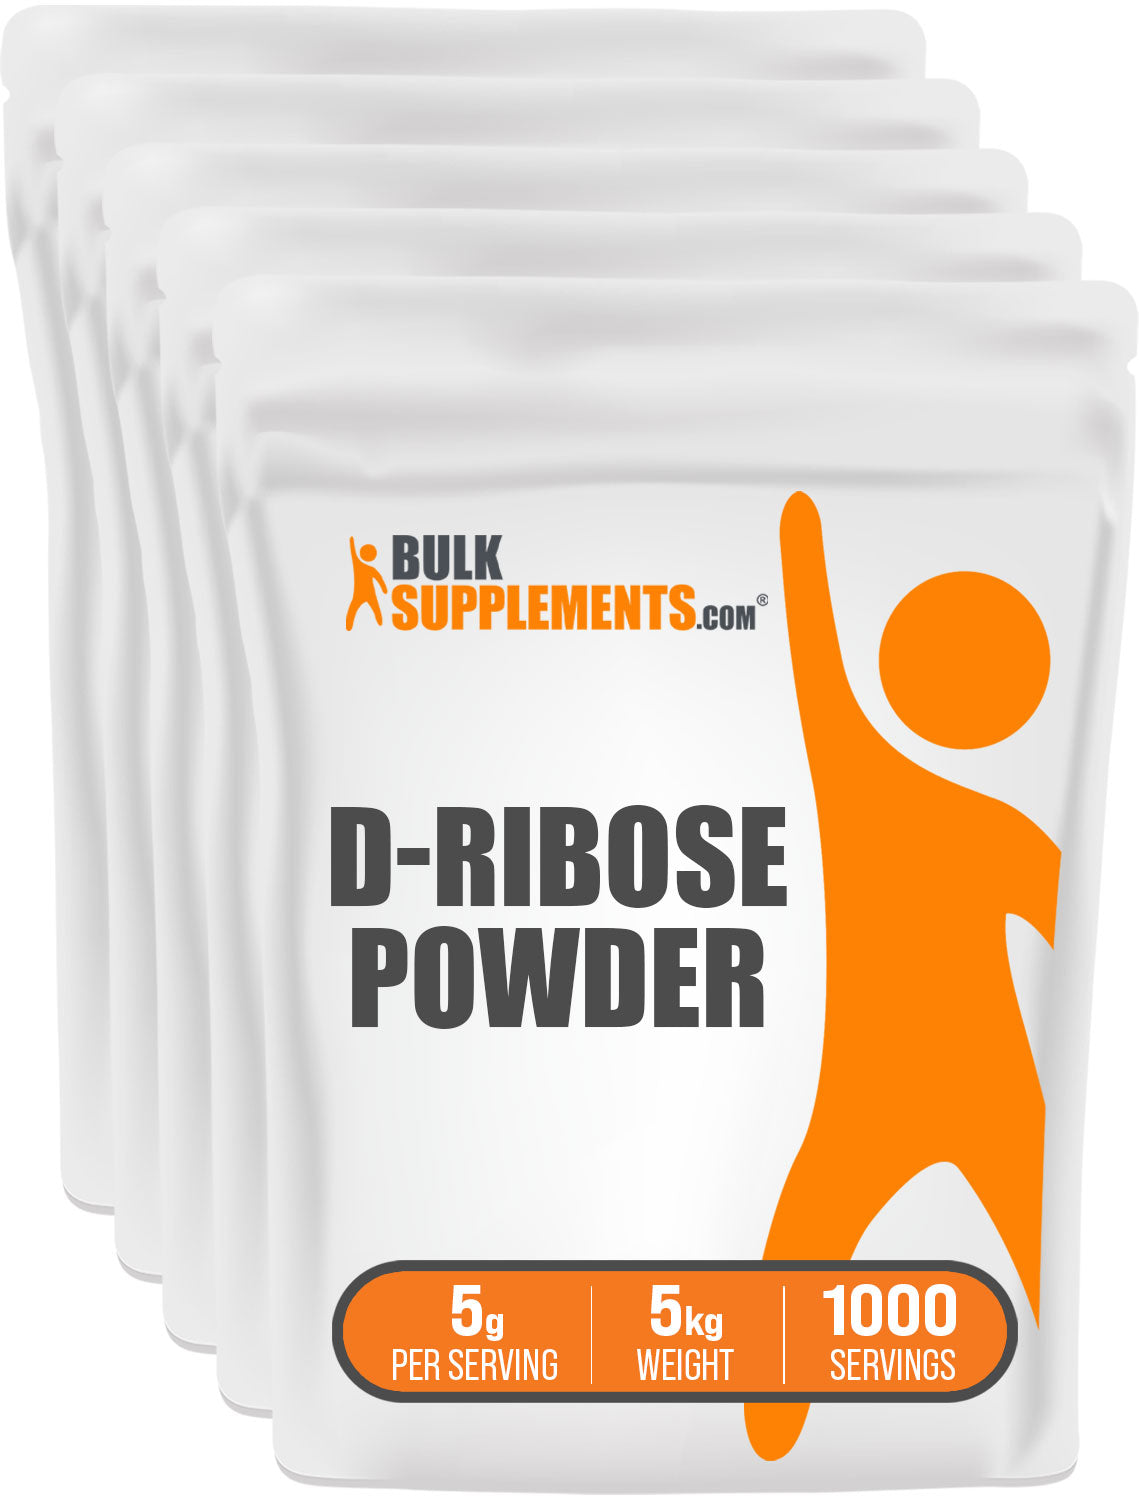  BULKSUPPLEMENTS.COM D-Ribose Powder - Dietary Supplement for  Energy & Muscle Support - Unflavored - 5g (5000mg) per Serving, 200  Servings (1 Kilogram - 2.2 lbs) : Health & Household